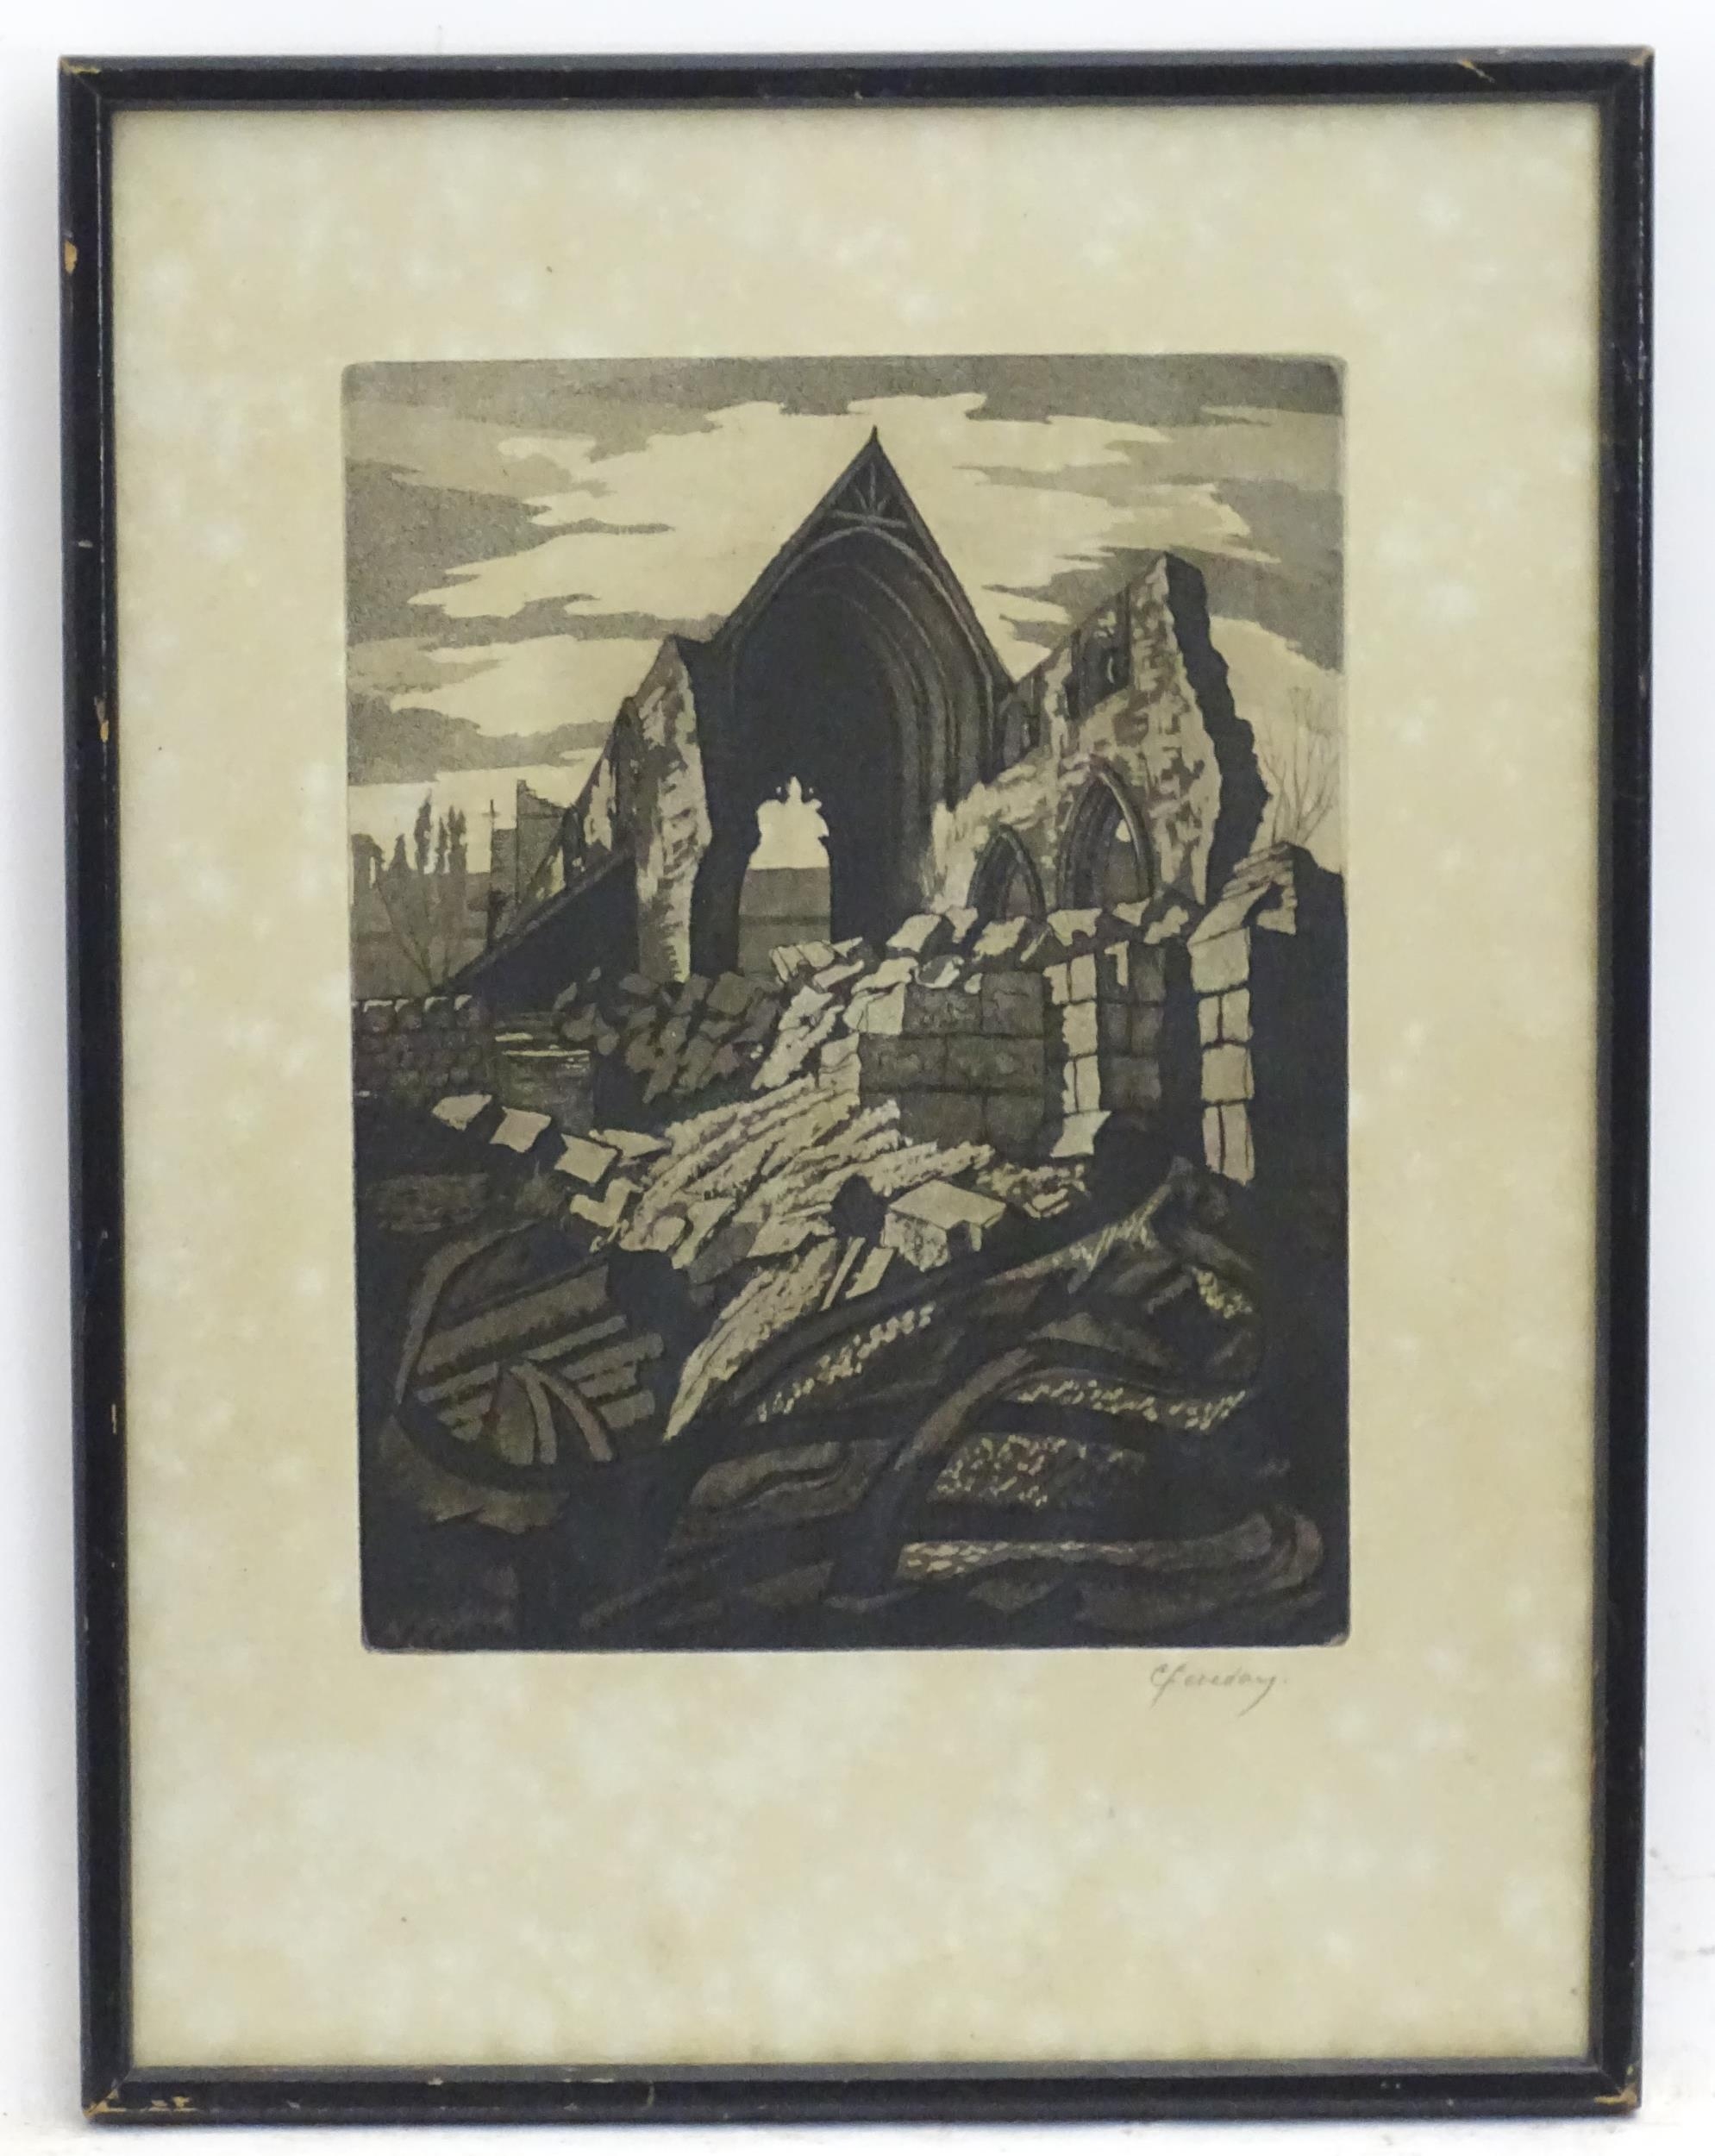 C. Fereday, 20th century, Engraving, A church ruin. Signed in pencil under. Approx. 9 1/2" x 6 3/